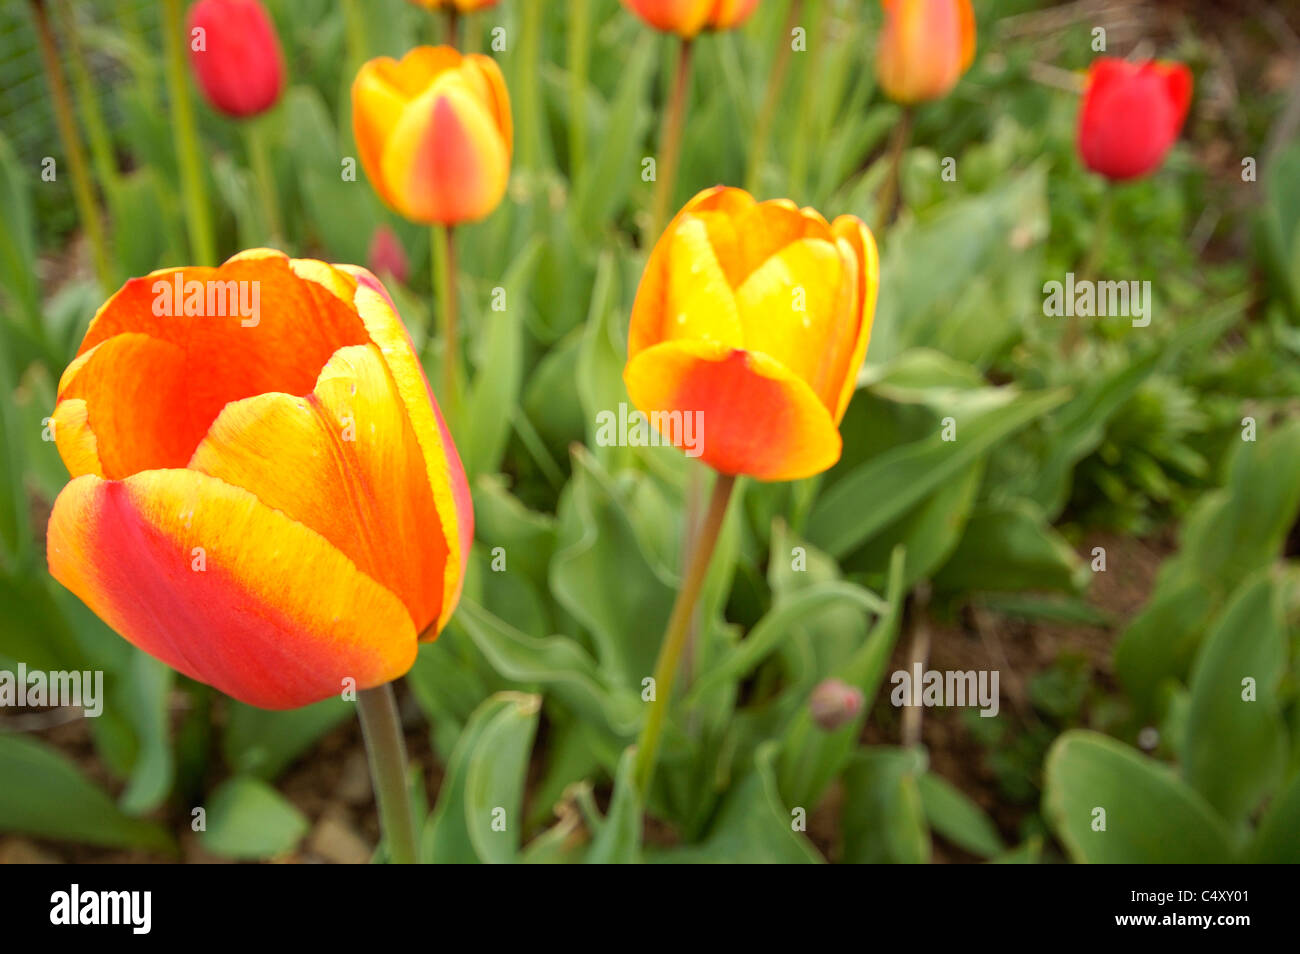 Closeup shot of red and yellow mixed tulips in a flower bed. Stock Photo